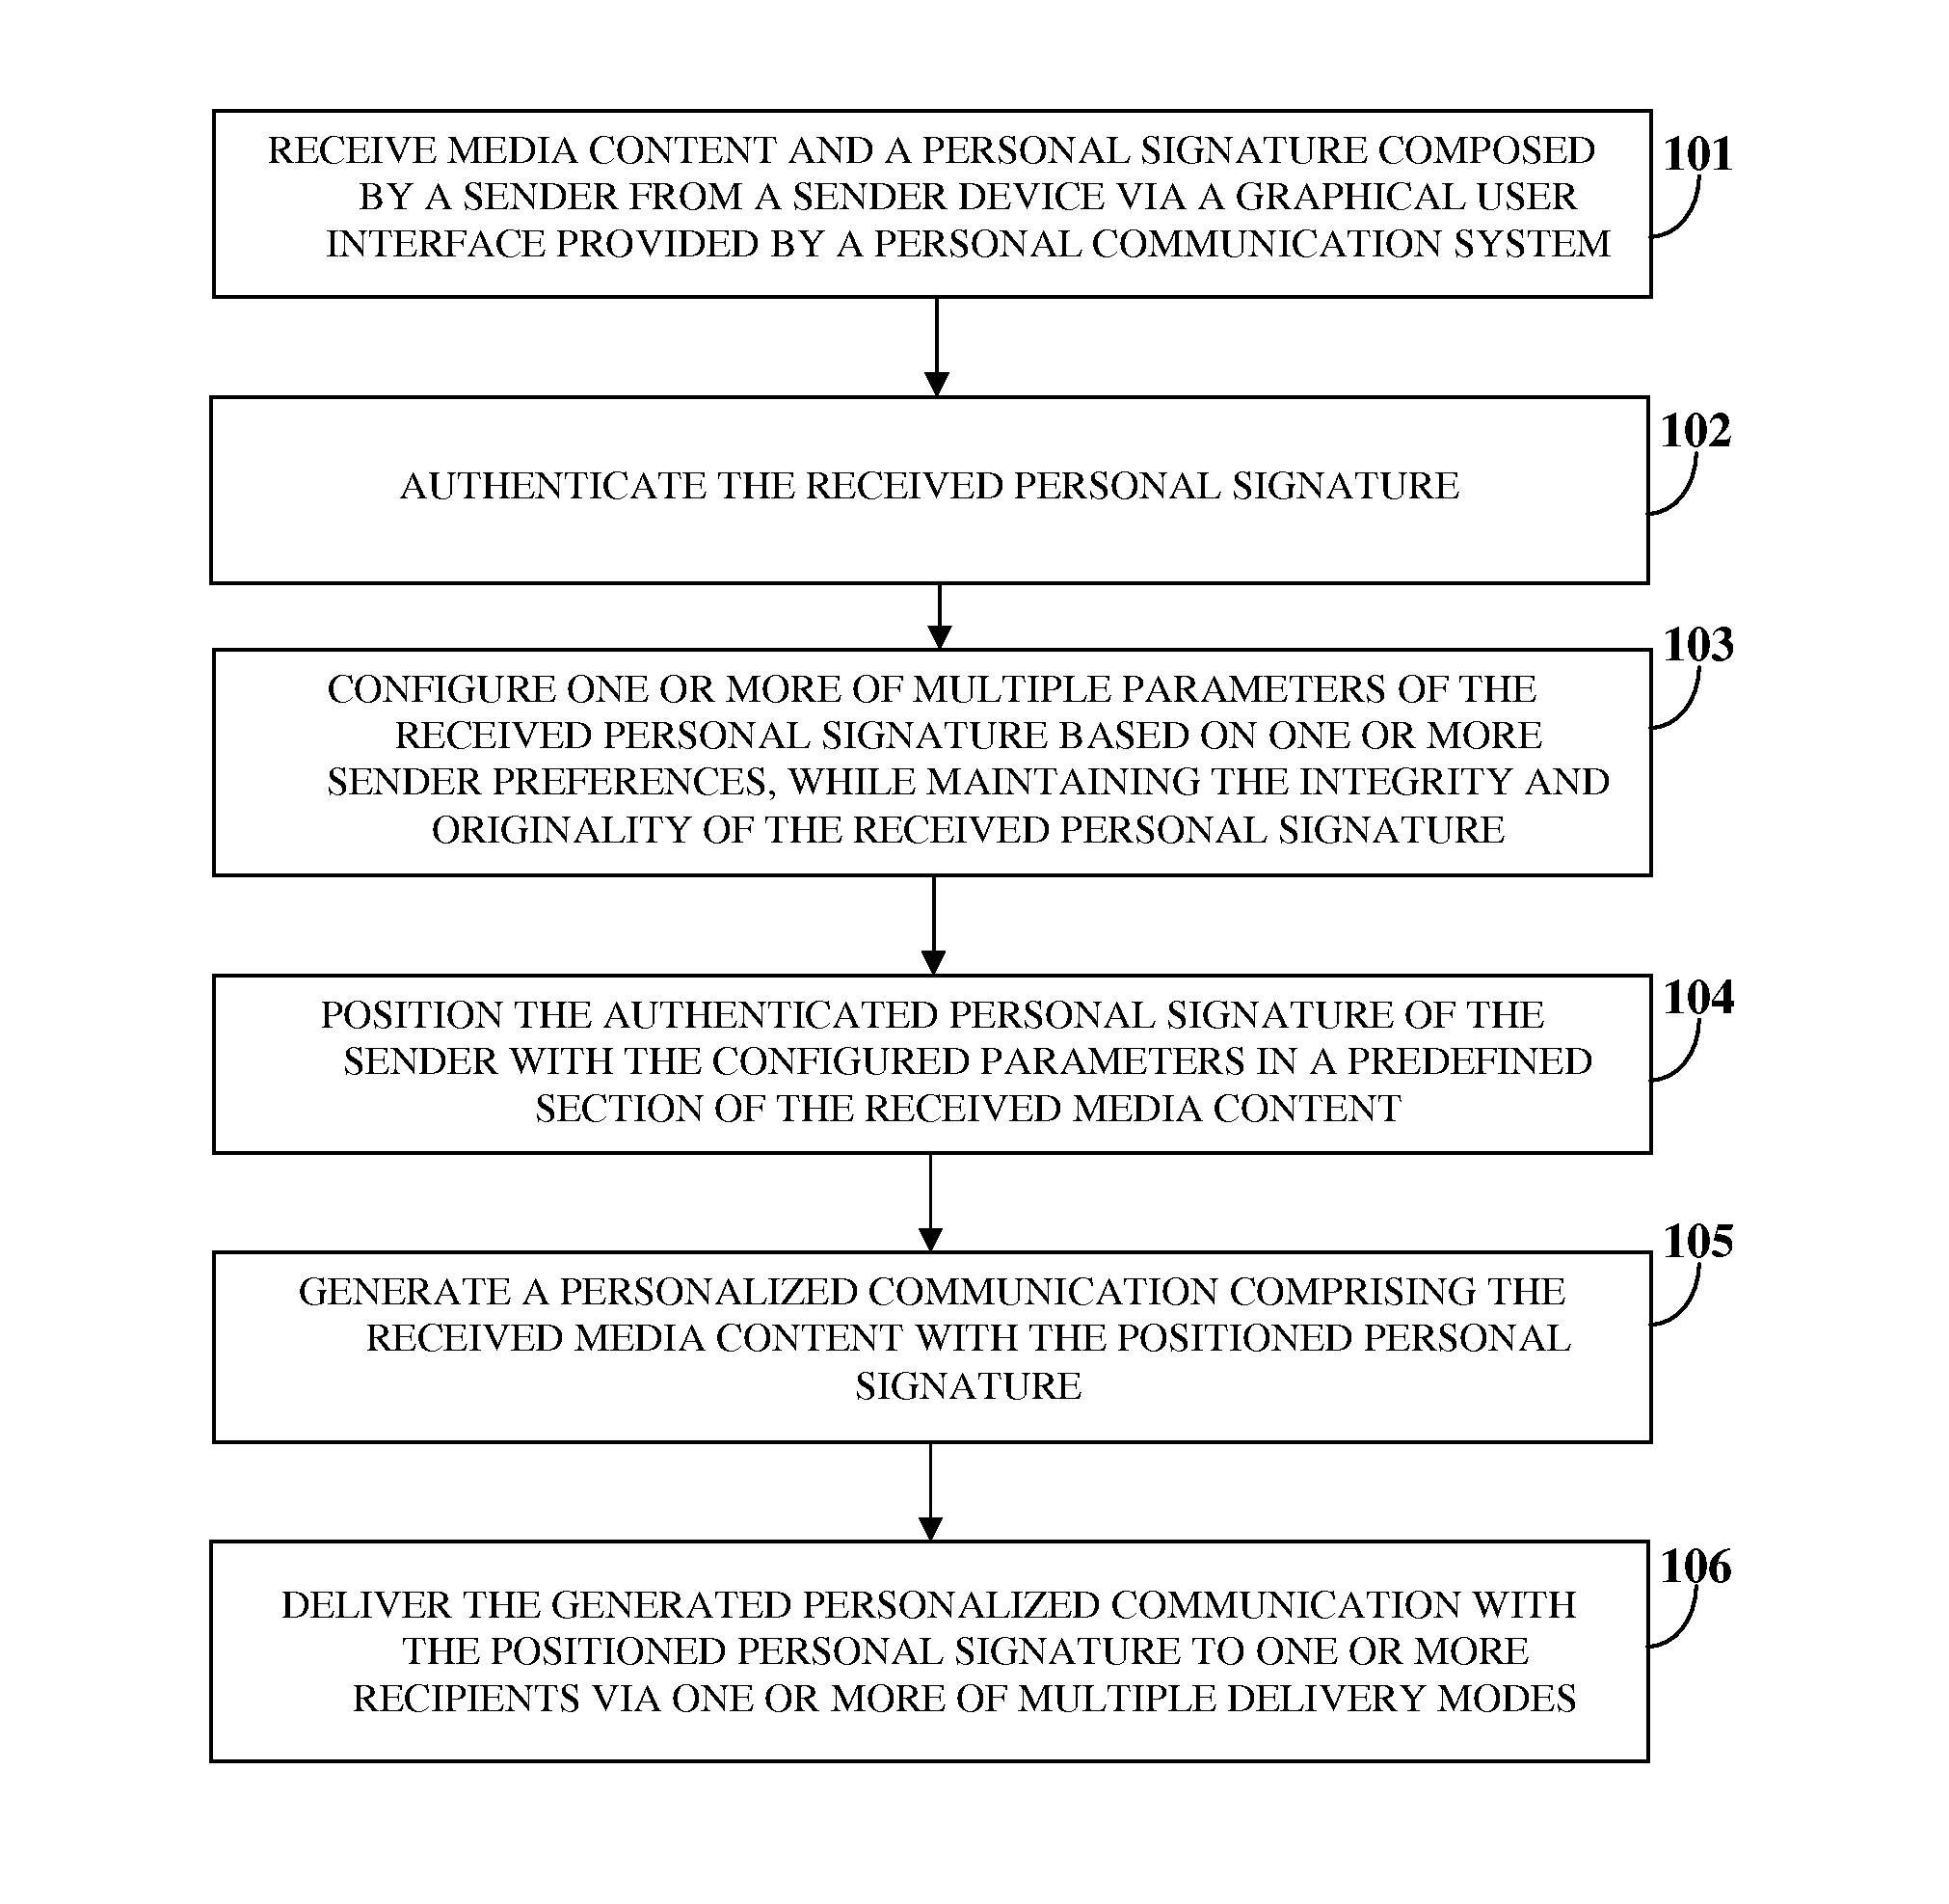 Electronic Personal Signature Generation And Distribution For Personal Communication